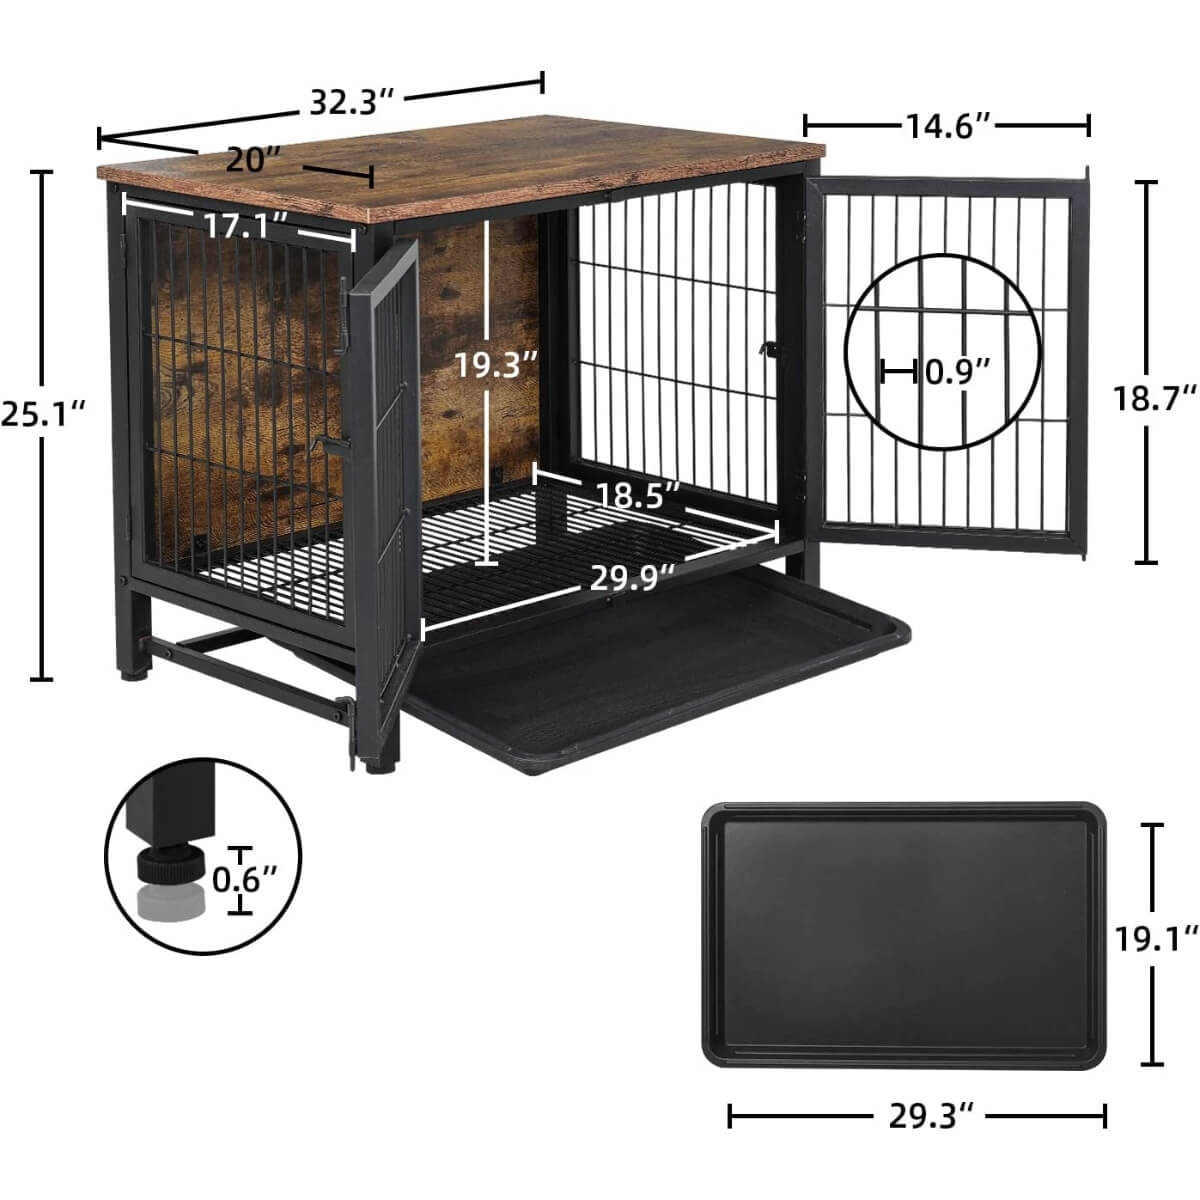 Size of medium wooden dog crate furniture with tray 